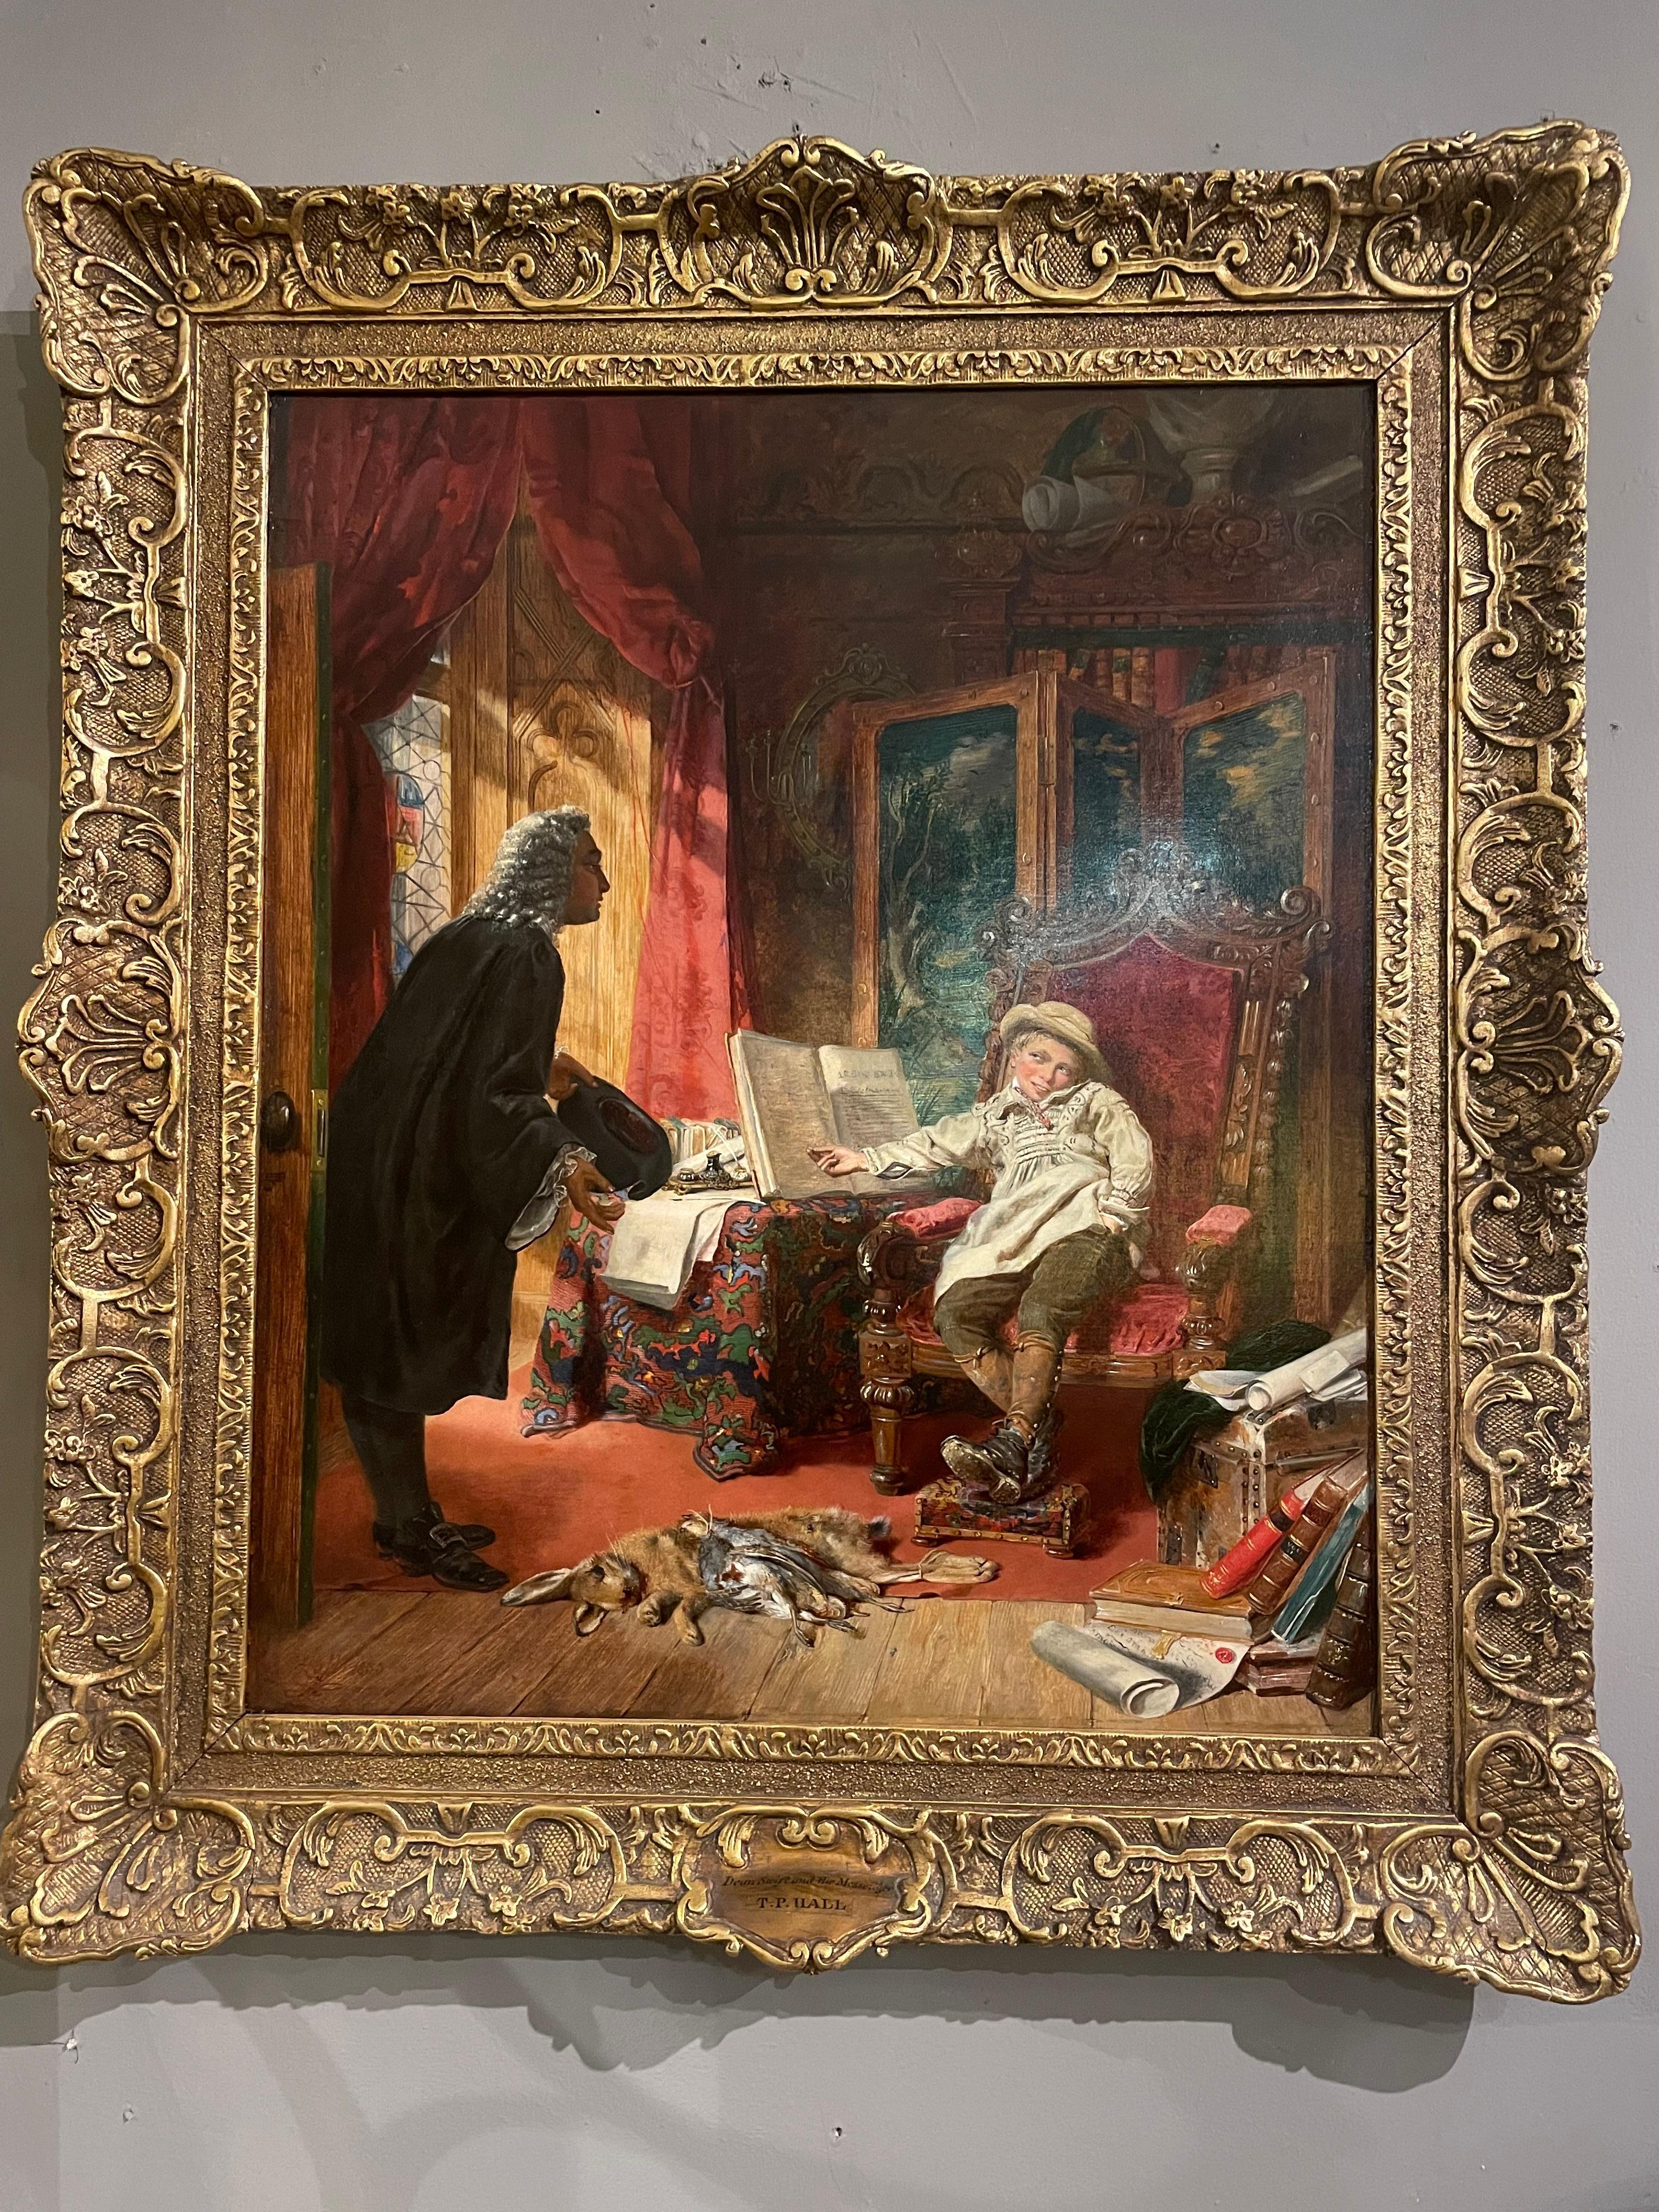 Hand-Painted 19th Century Oil On Canvas Titled ‘Dean Swift & The Young Merchant’ By T.P. Hall For Sale